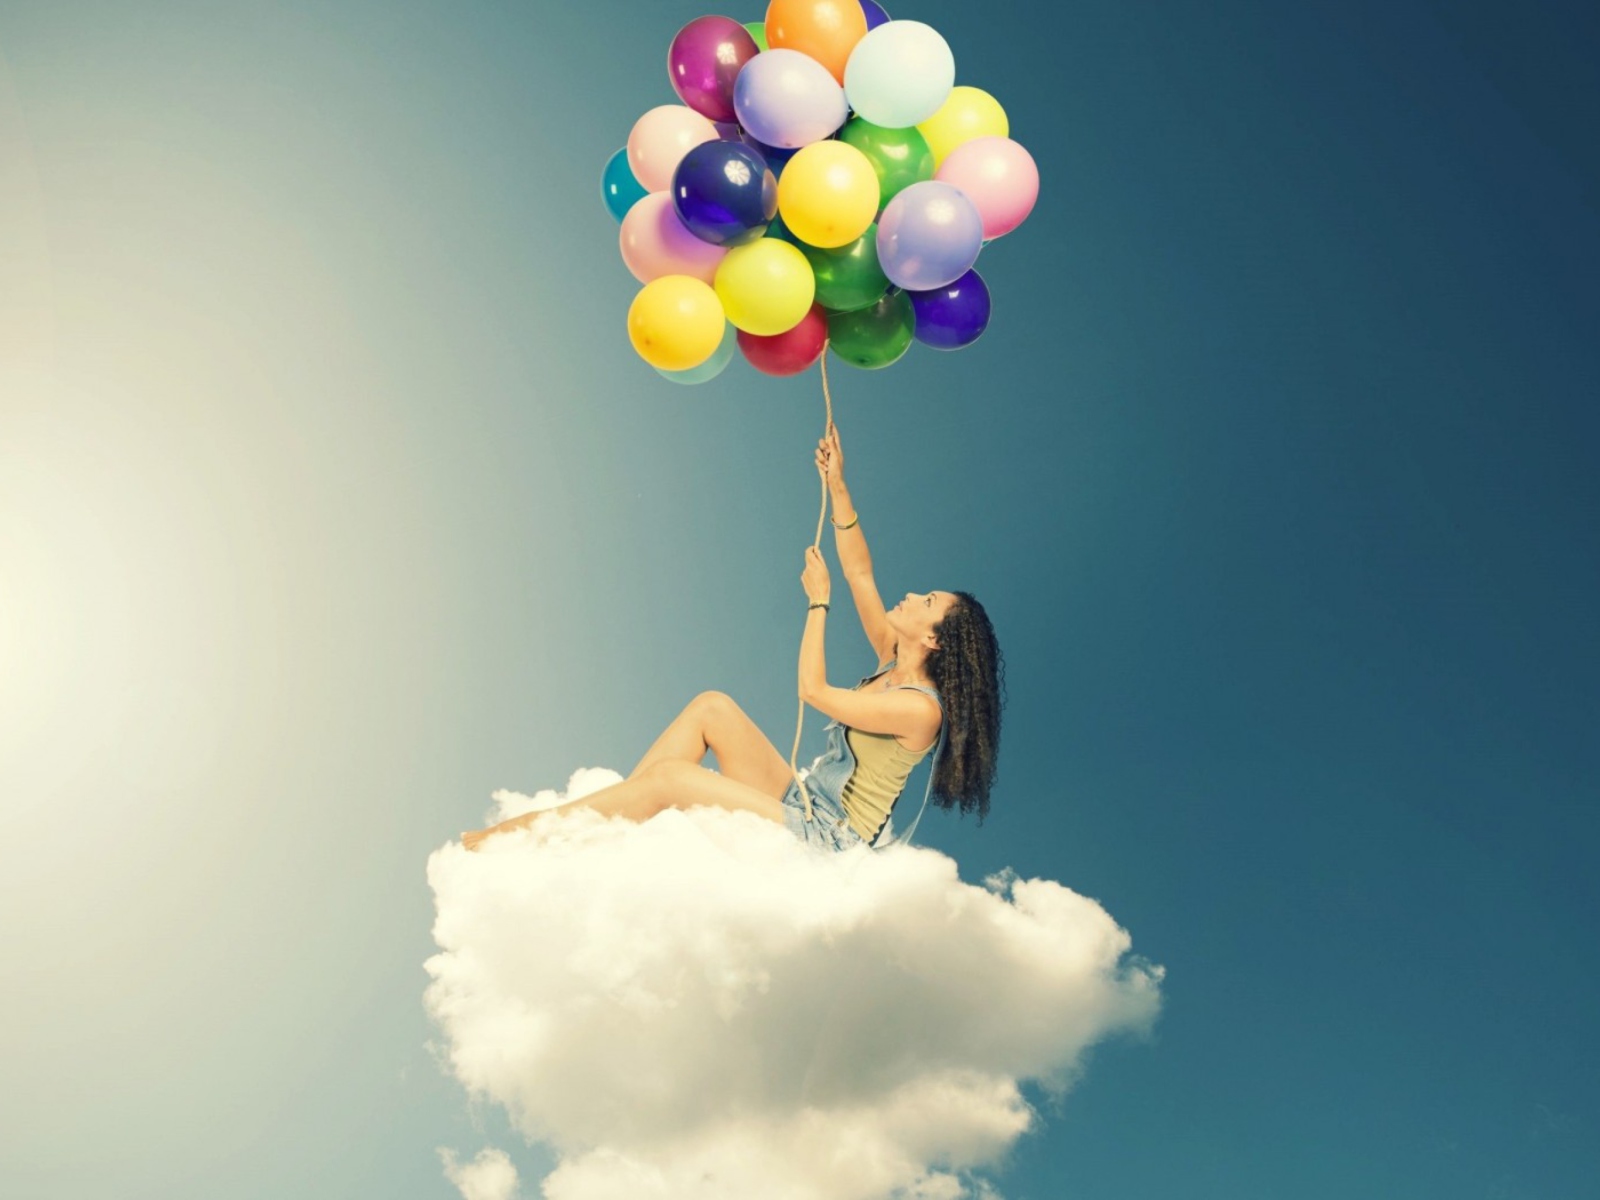 Flyin High On Cloud With Balloons wallpaper 1600x1200